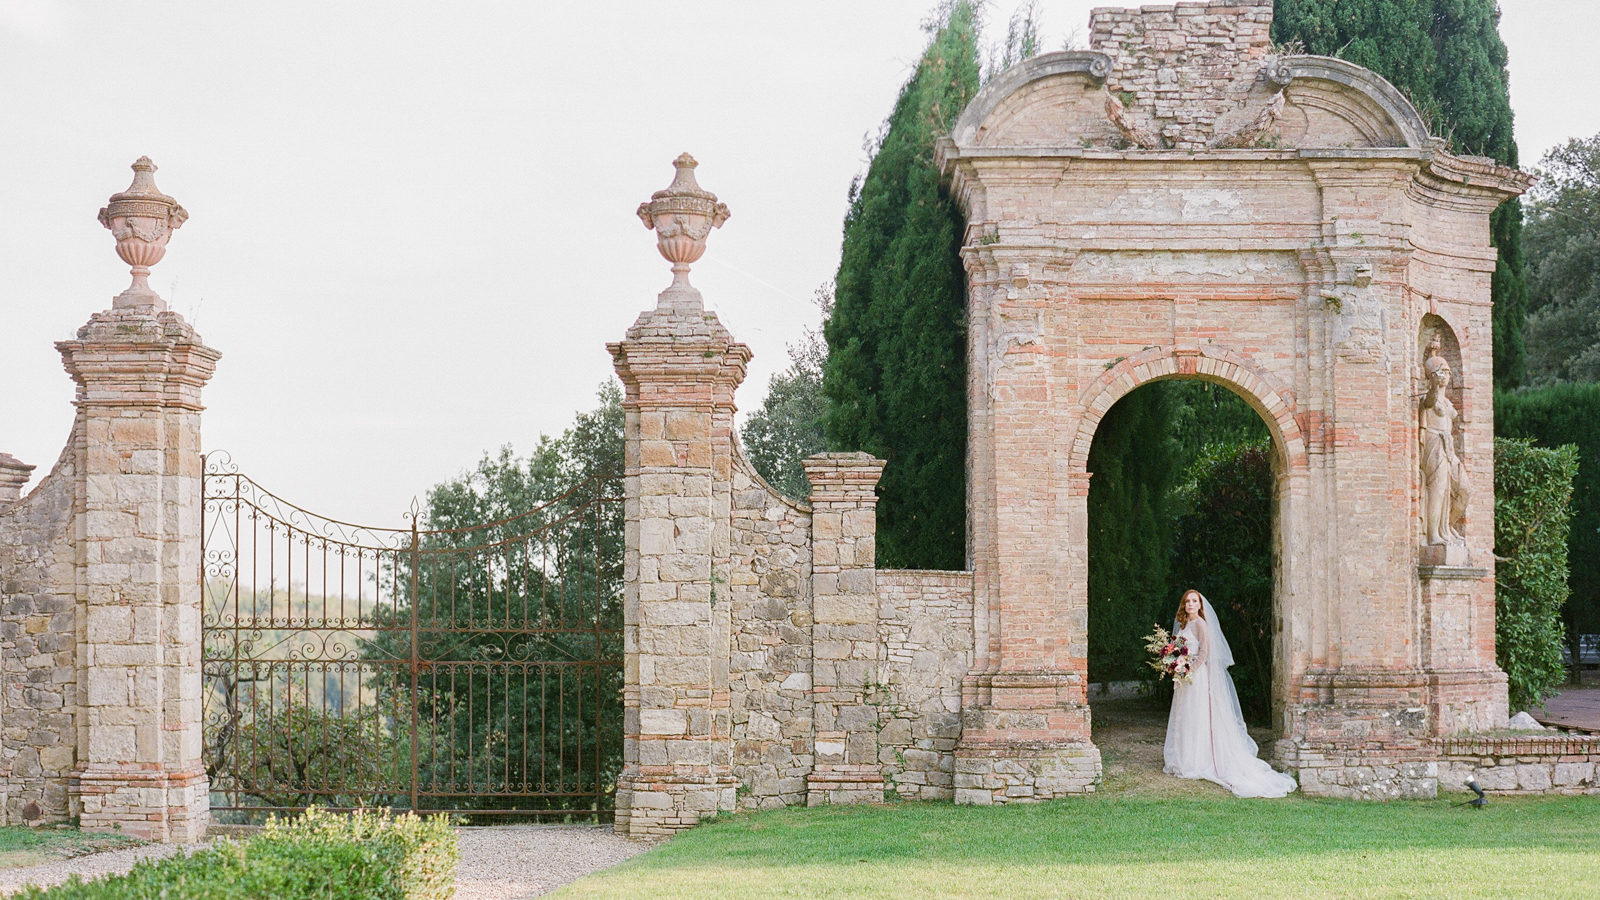 Tuscany Wedding Photographer | Molly Carr Photography | Villa di Geggiano Luxury Wedding | Italy Film Photographer | Fete Event Planning | Isibeal Studio